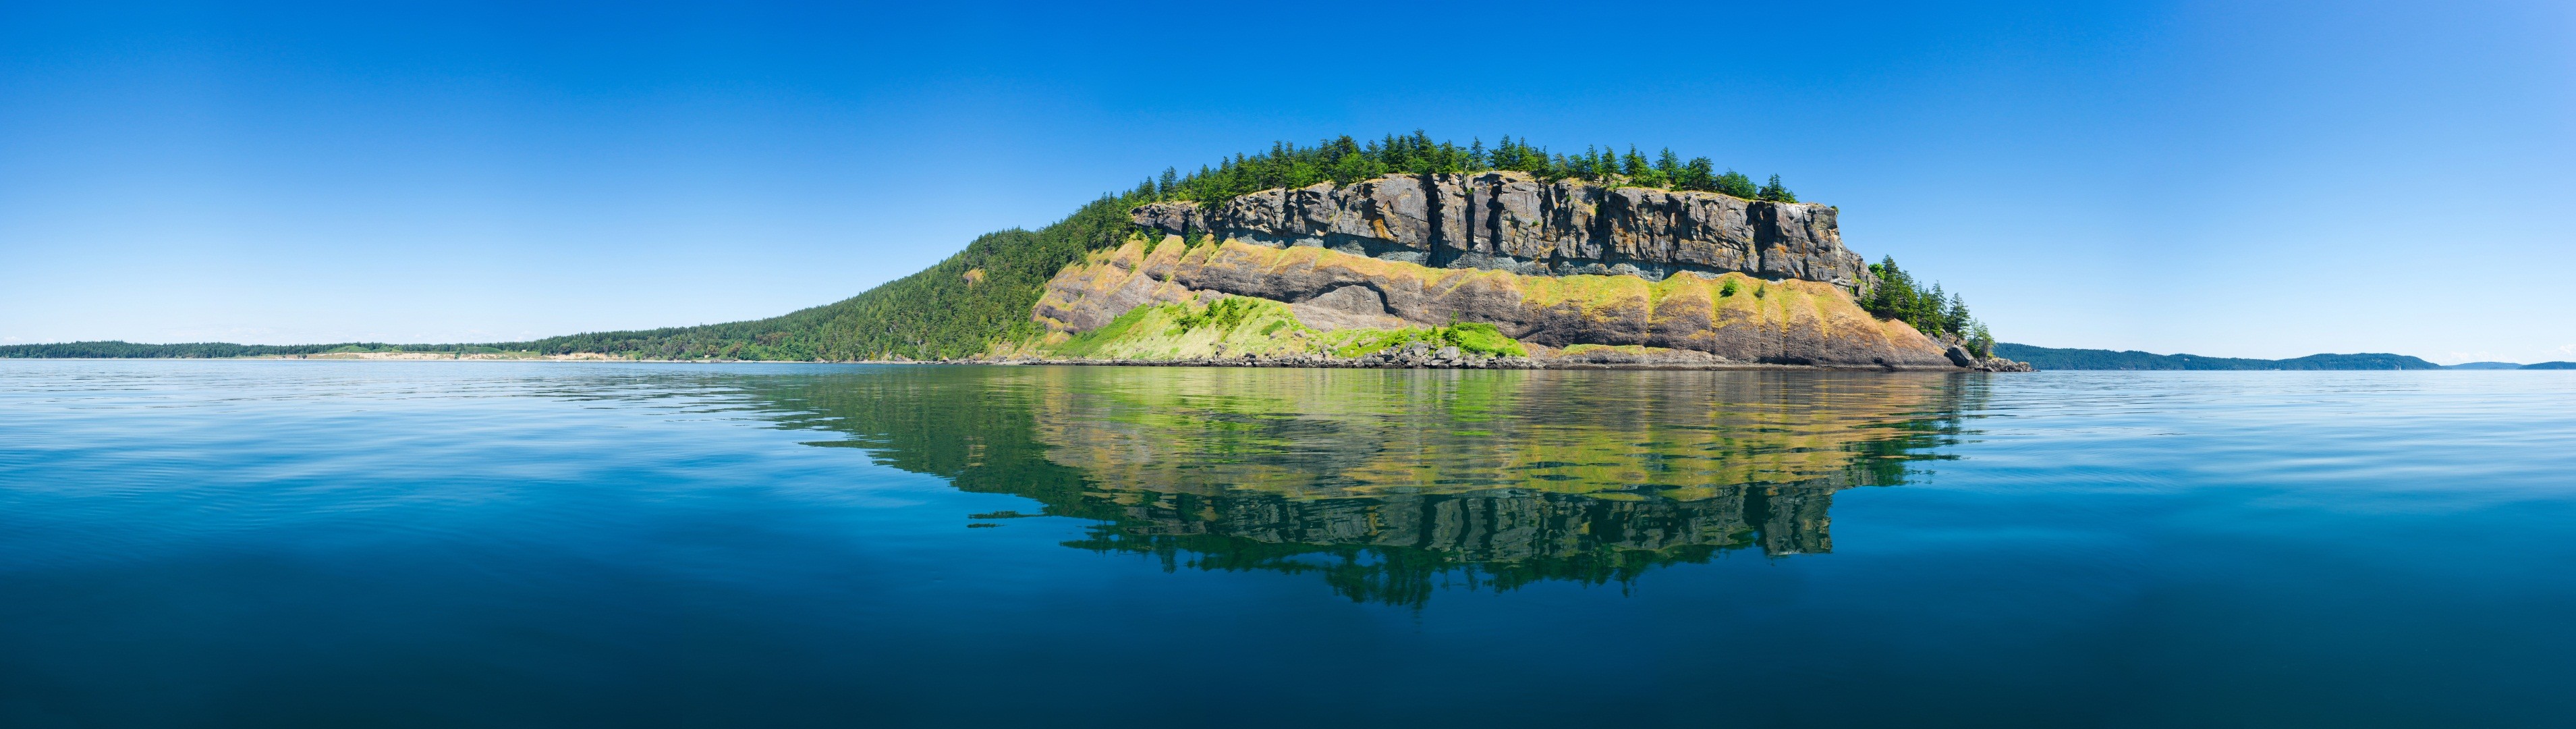 General 3818x1080 panorama island cliff forest lake water blue green nature landscape reflection